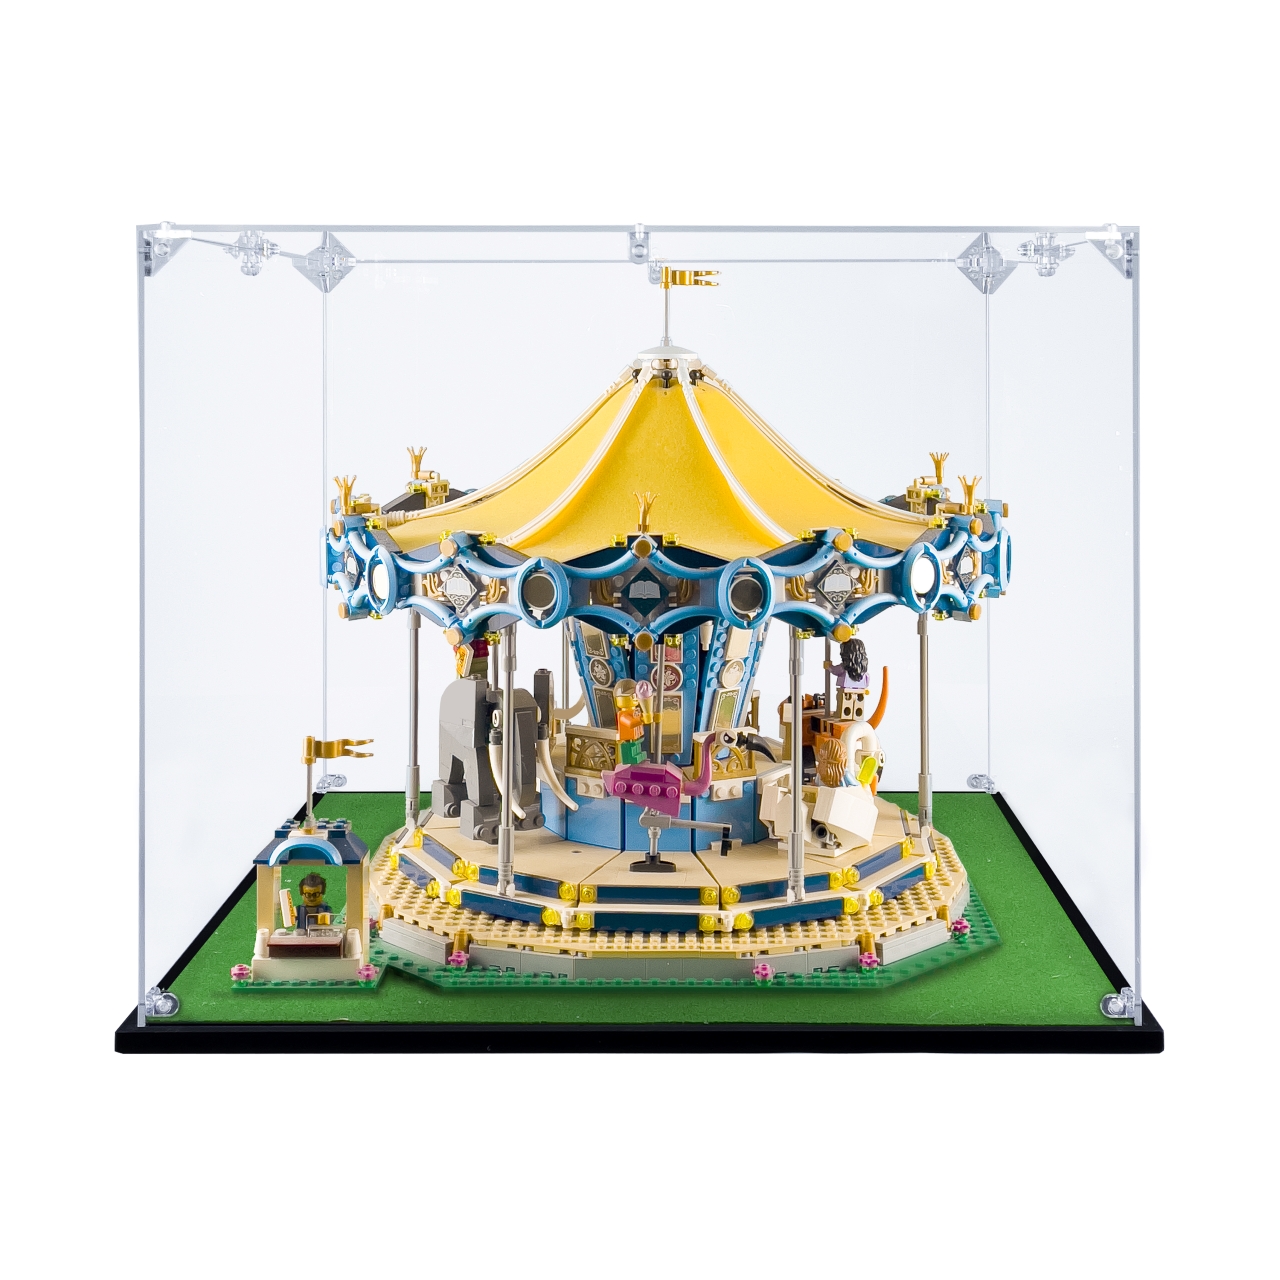 Display Case for LEGO Carousel #10257 -